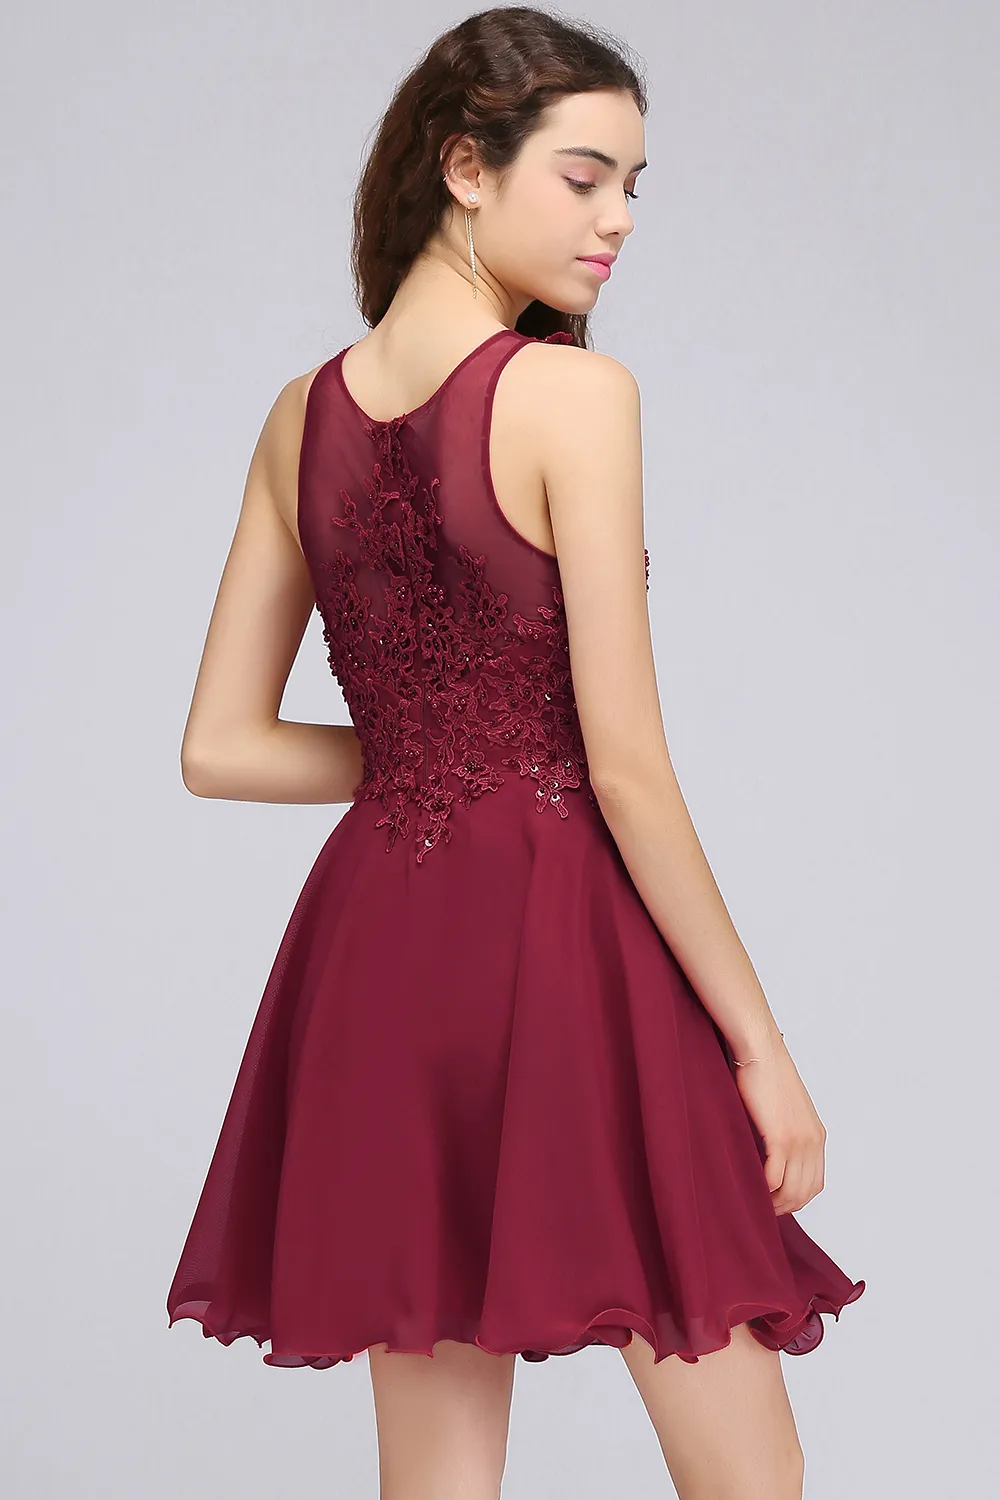 Wine Red Lace Beaded A Line Homecoming Dresses Short Chiffon Cocktail Party Dresses For Young Girls Jewel Neck Cheap Homecoming Gowns CPS707